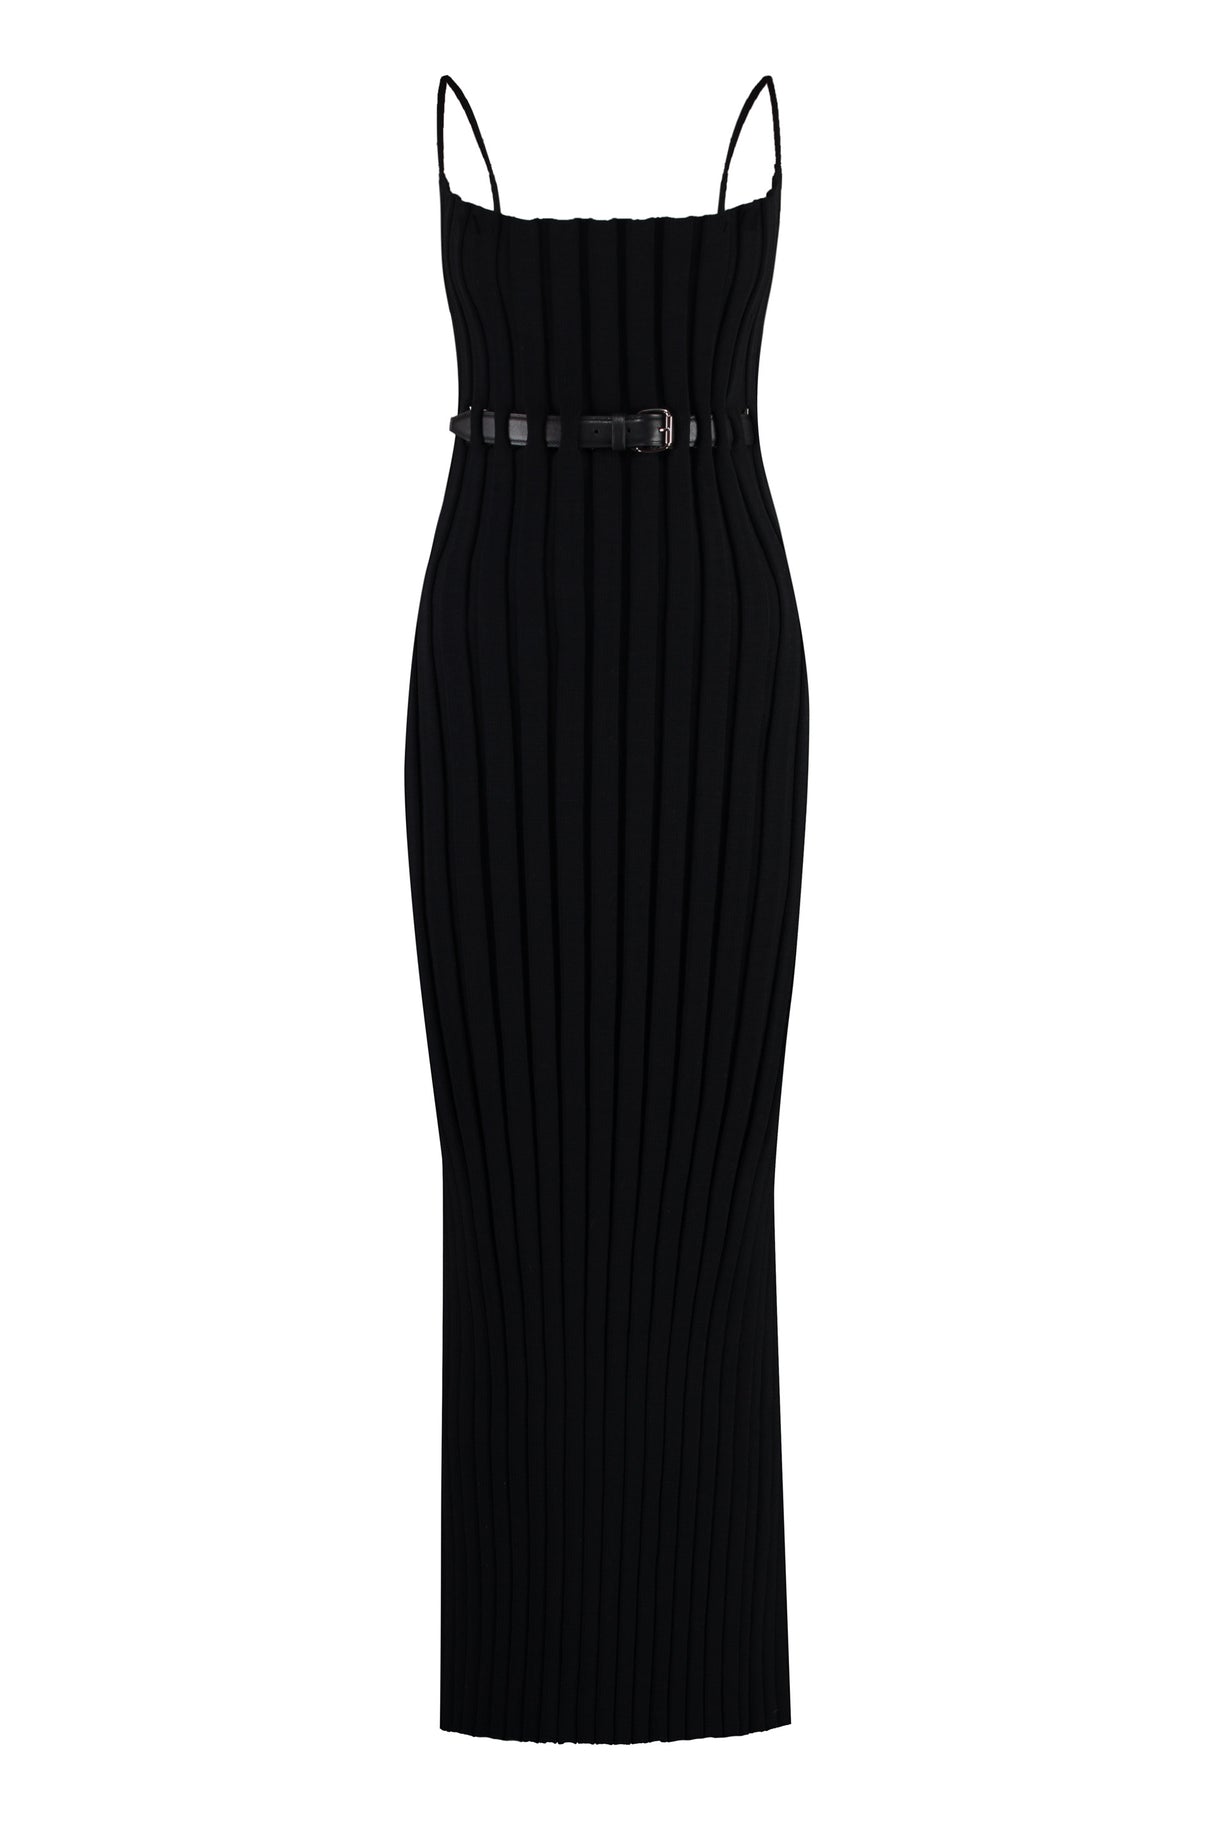 ALEXANDER WANG Black Knit Dress with Coordinated Leather Belt and Back Slit